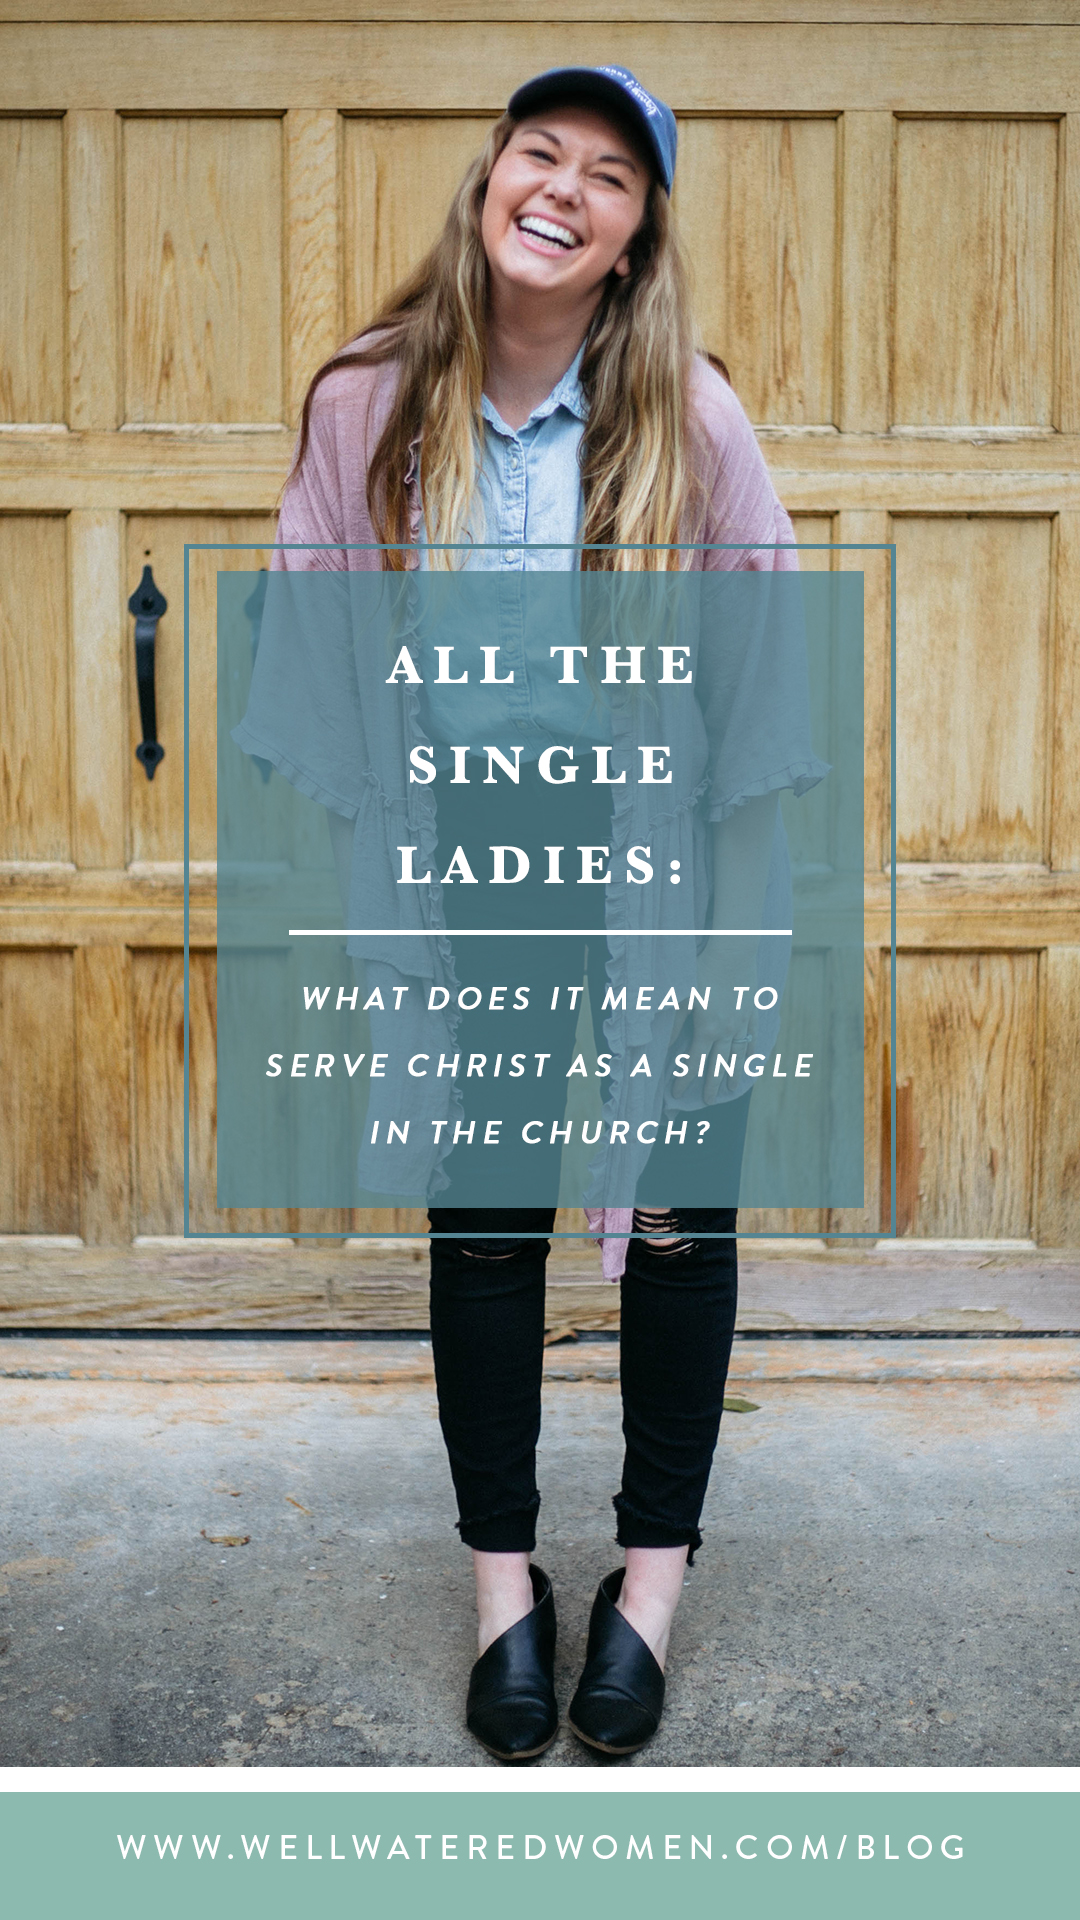 All the Single Ladies: What does it mean to serve Christ as a signle woman in the church?